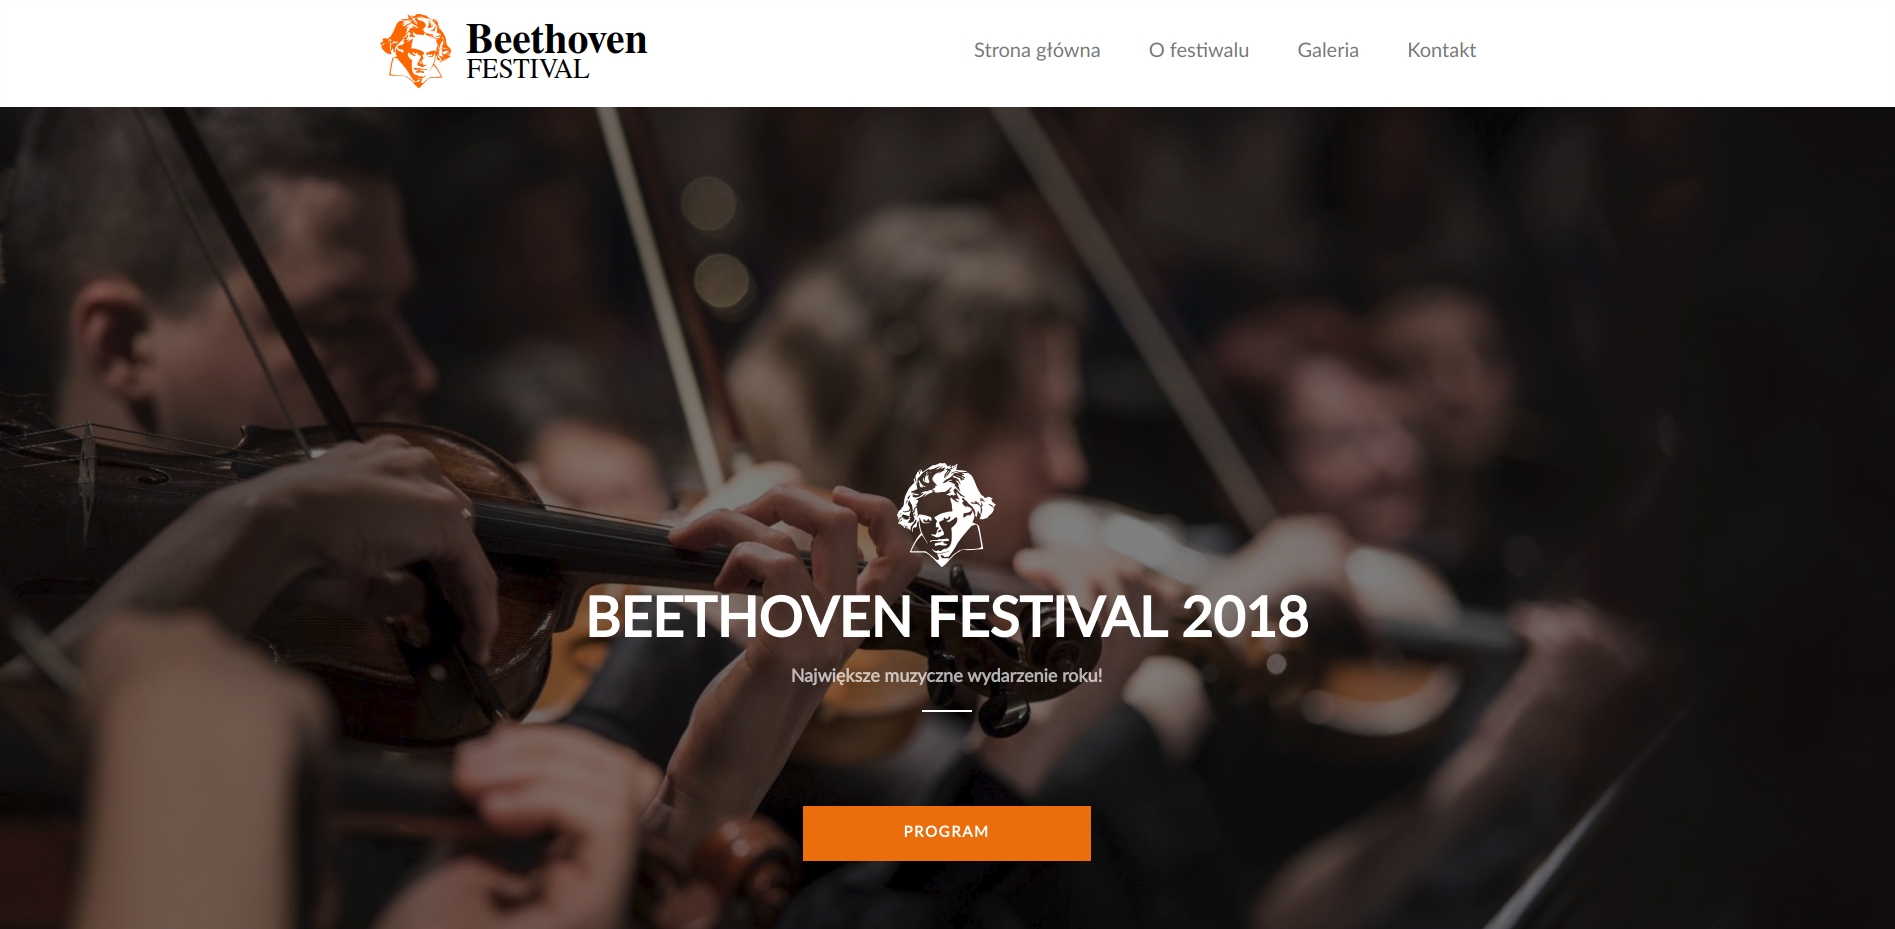 Beethoven festival 2018 - a screenshot of main site with menu, logo and call to action button. Blurred image of the orchestra is inserted as a background